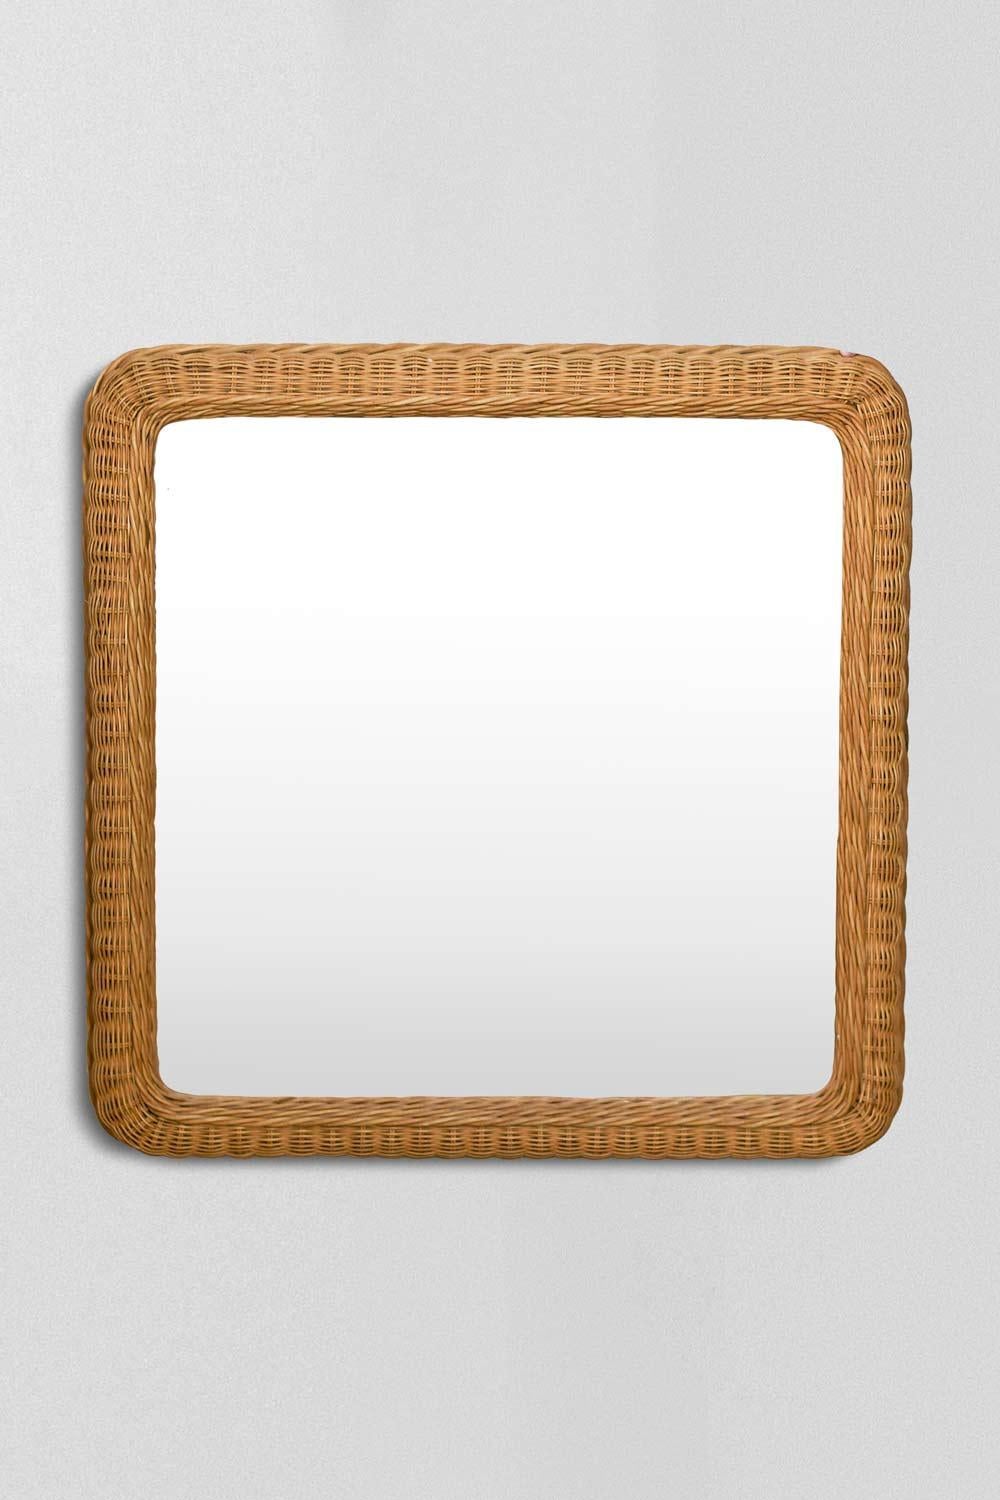 Large square mirror in hand-woven wicker, Italy 1980
Product details
Dimensions: 102 W x 102 H x 10 D cm